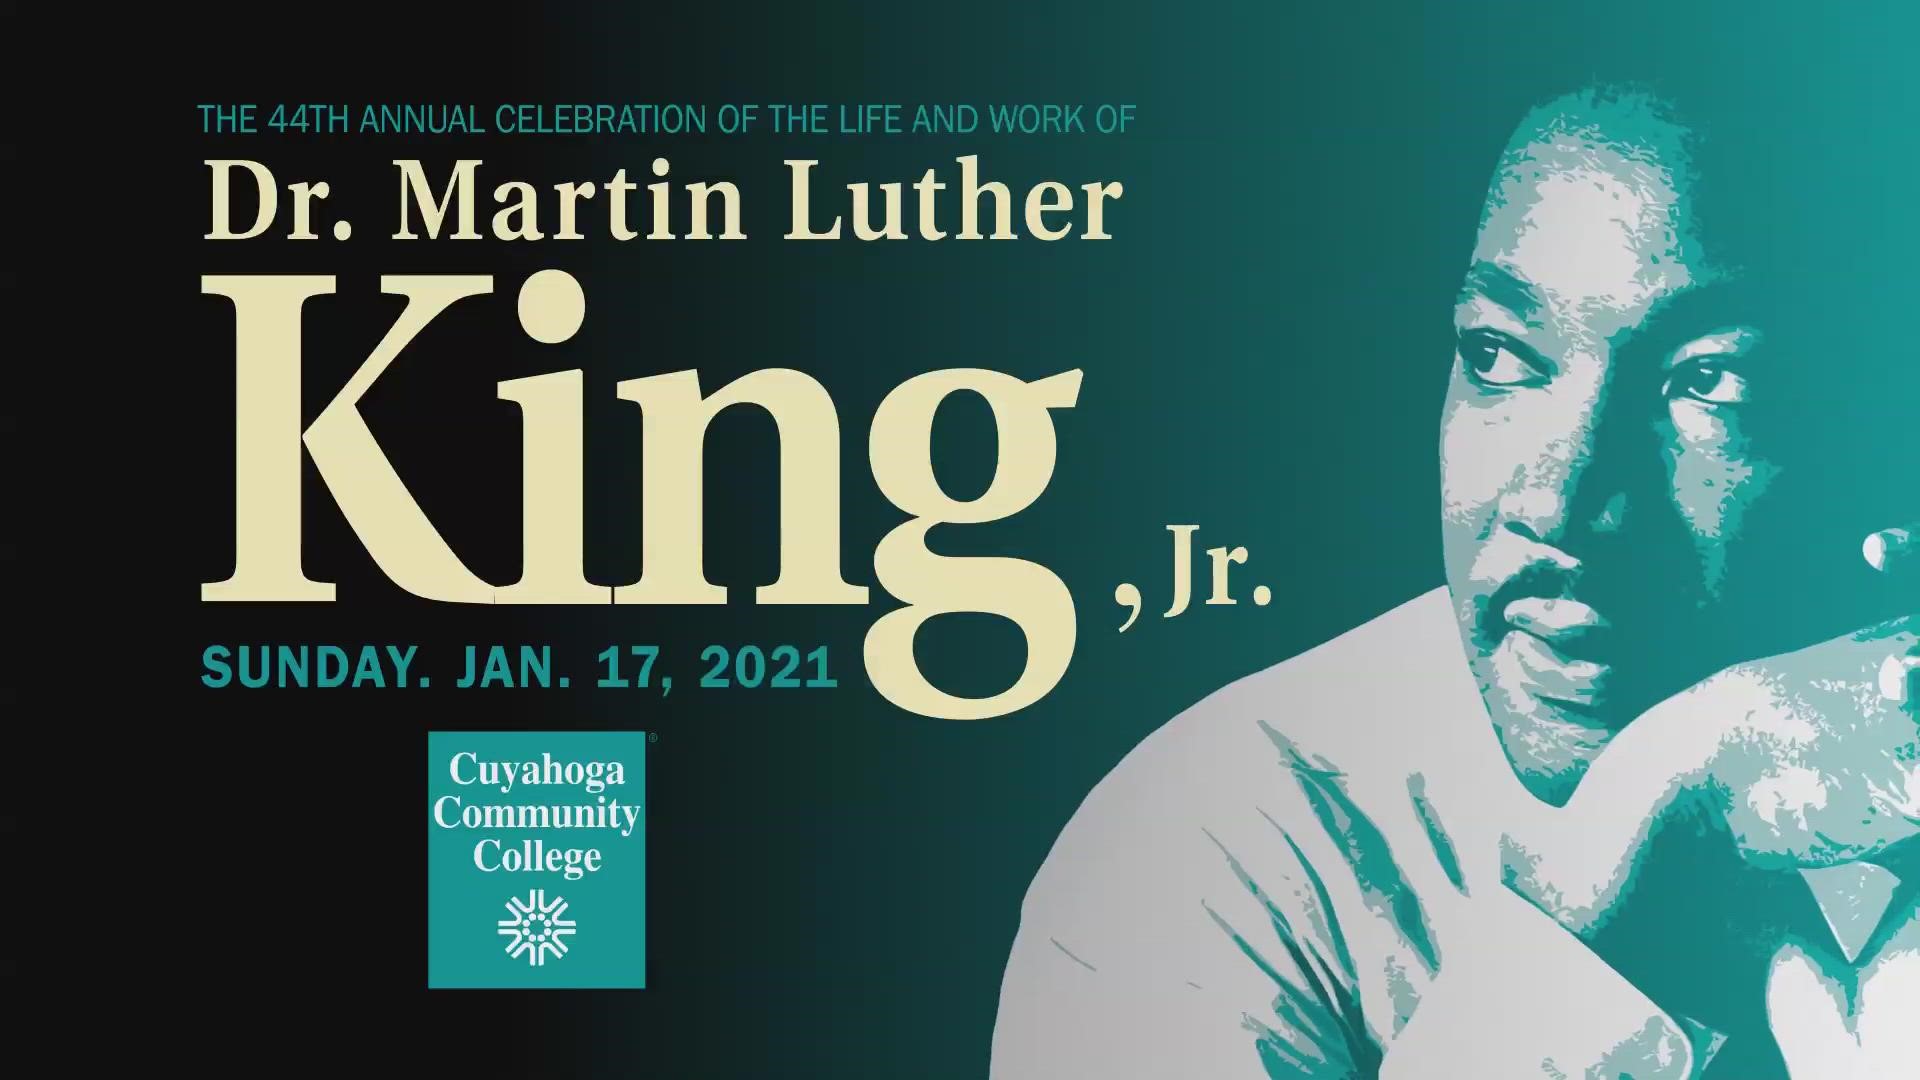 The Dr. Martin Luther King, Jr. celebration hosted by Cuyahoga Community College is a tradition that dates back to 1977.